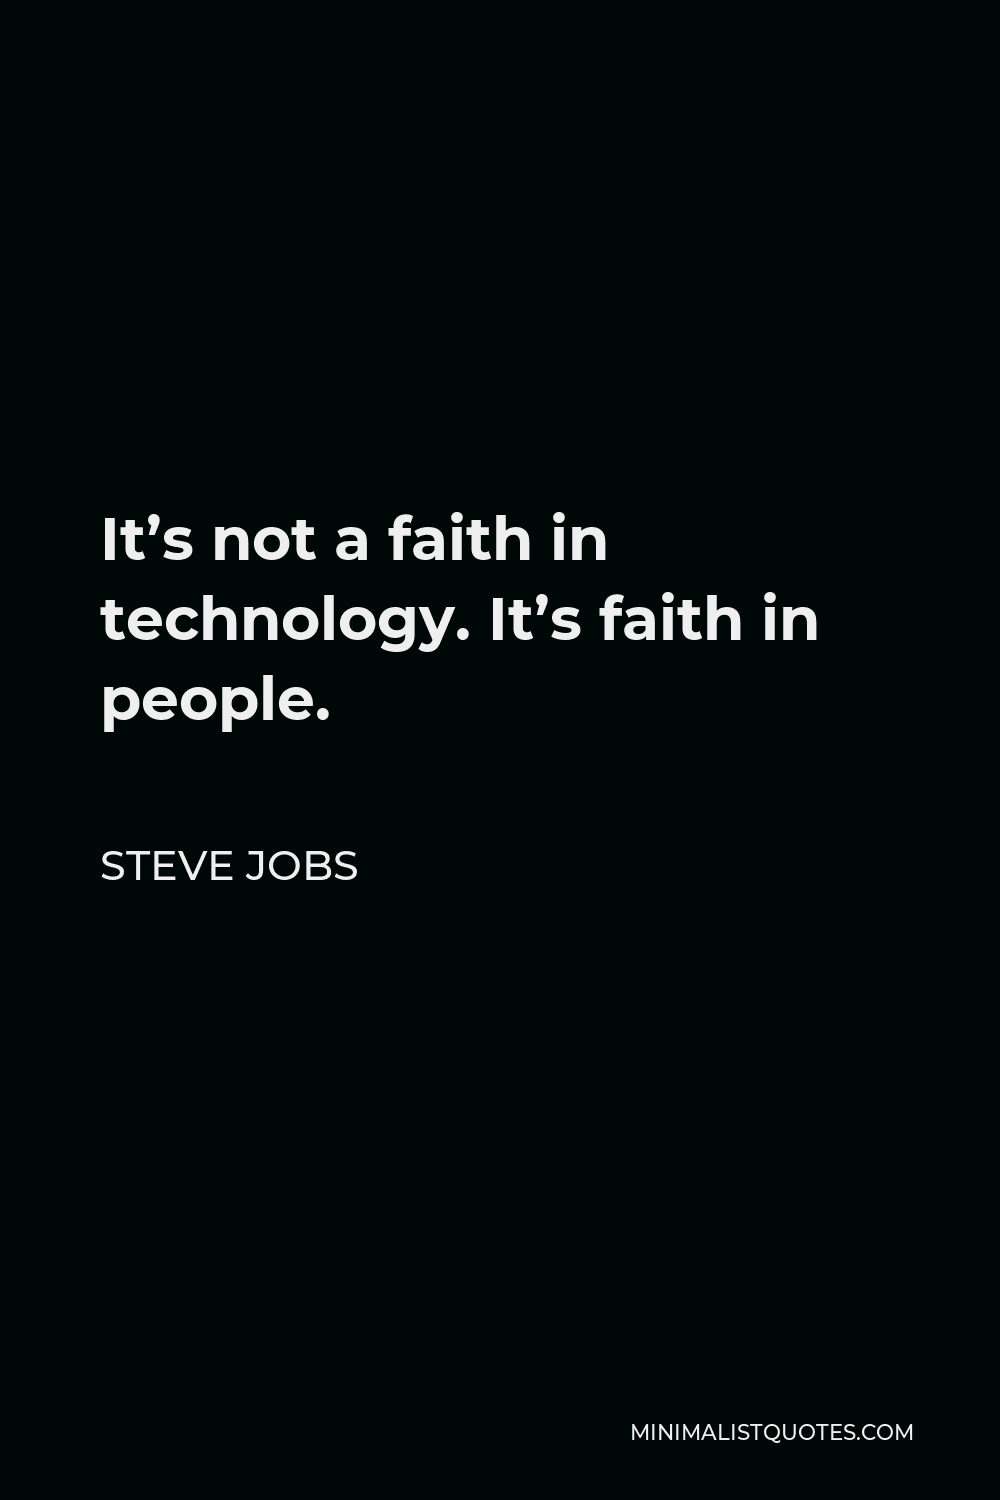 Steve Jobs Quote - It’s not a faith in technology. It’s faith in people.